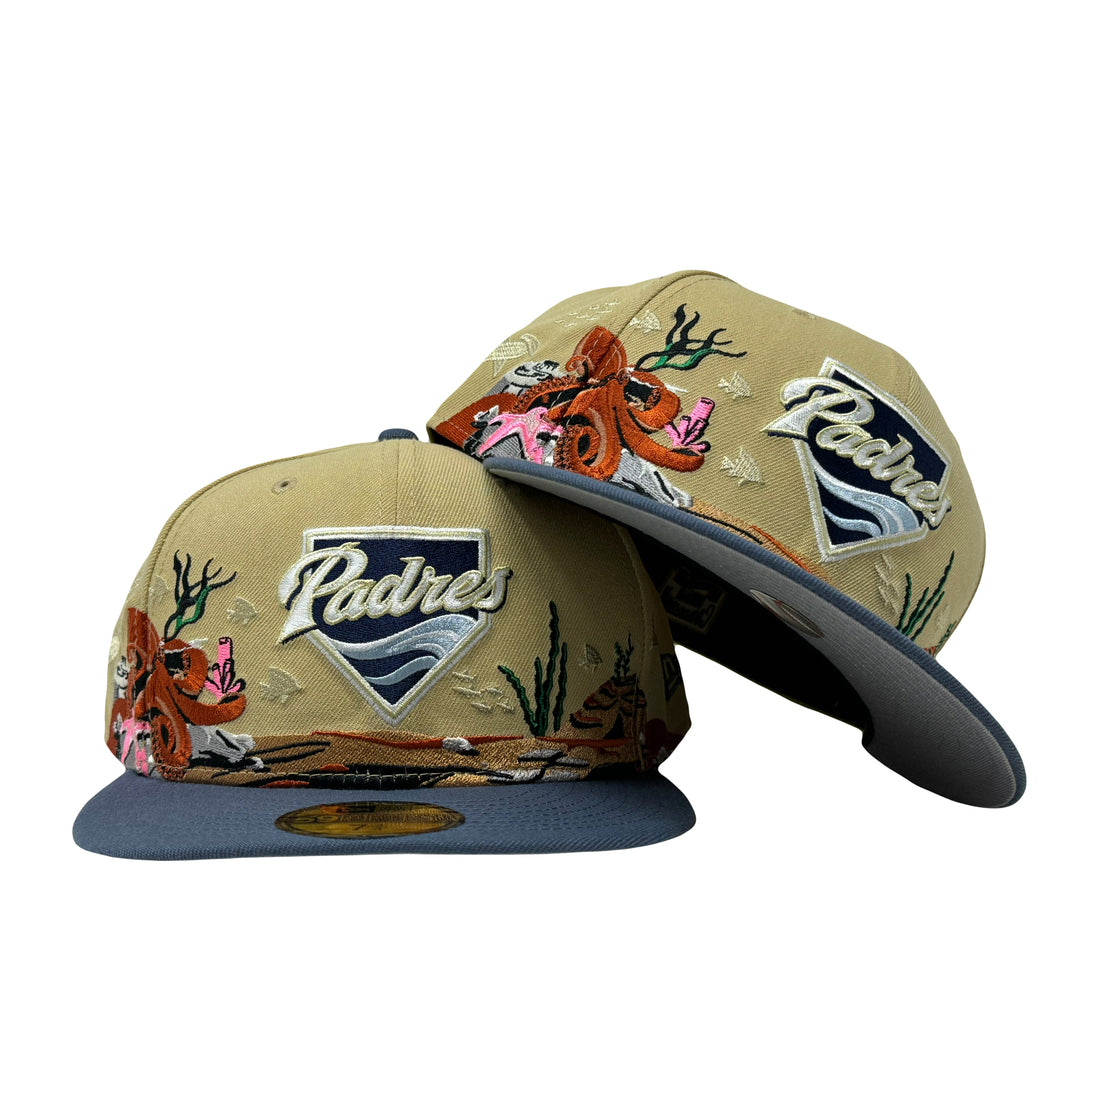 San Diego Padres Ocean Pack 5950 New Era Fitted Hat